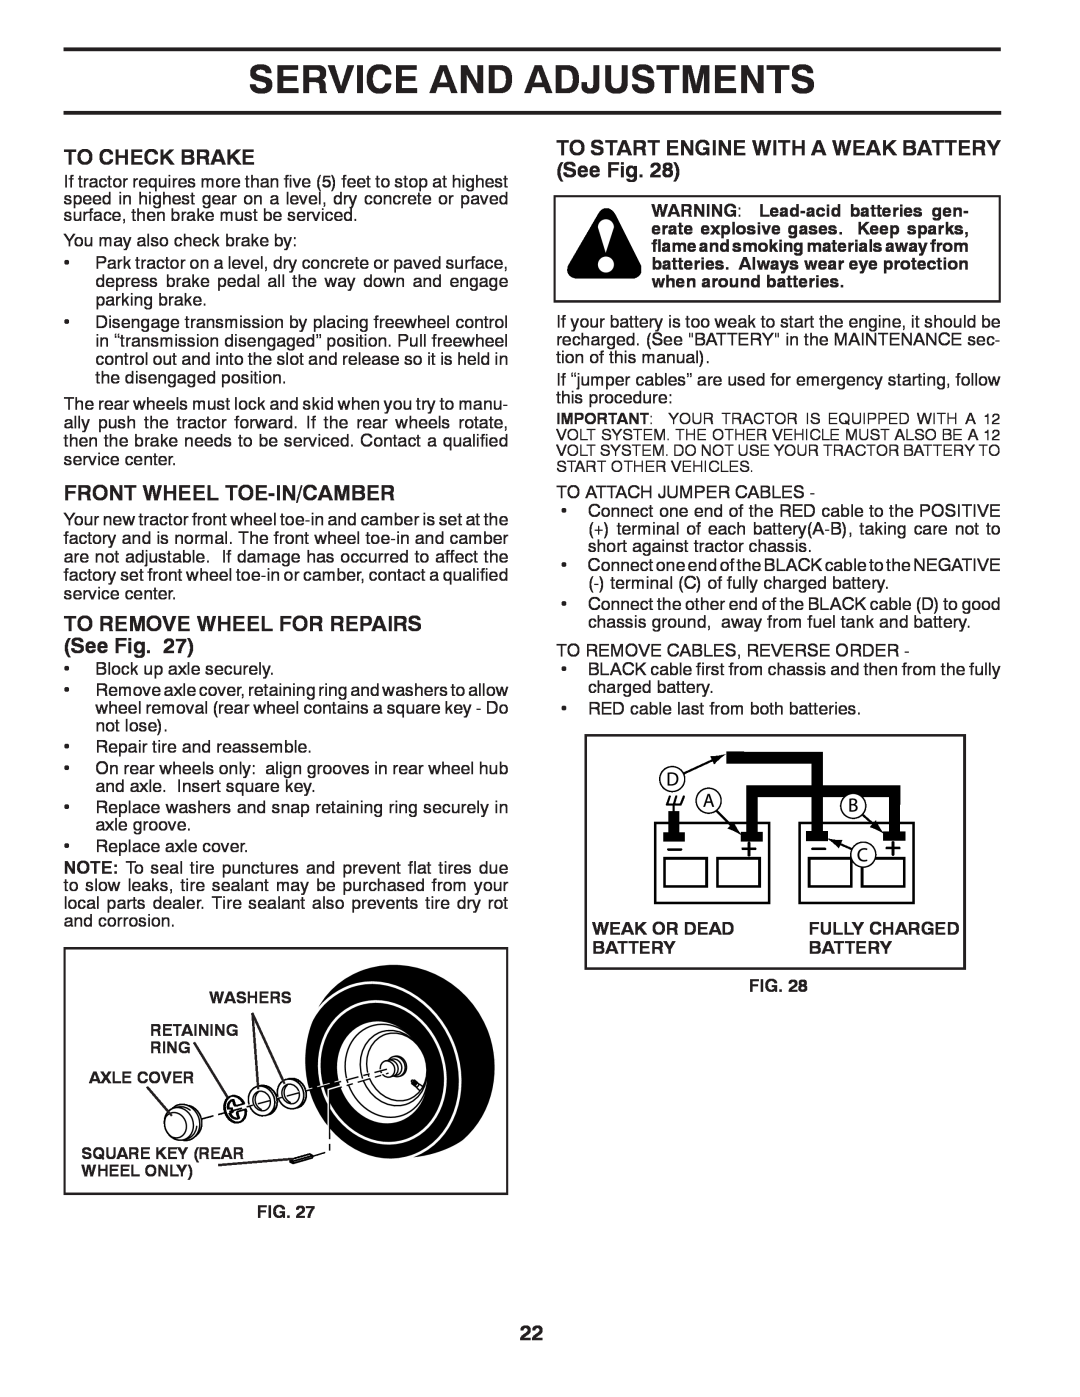 Husqvarna 96043005200 manual To Check Brake, Front Wheel Toe-In/Camber, TO REMOVE WHEEL FOR REPAIRS See Fig, Weak Or Dead 